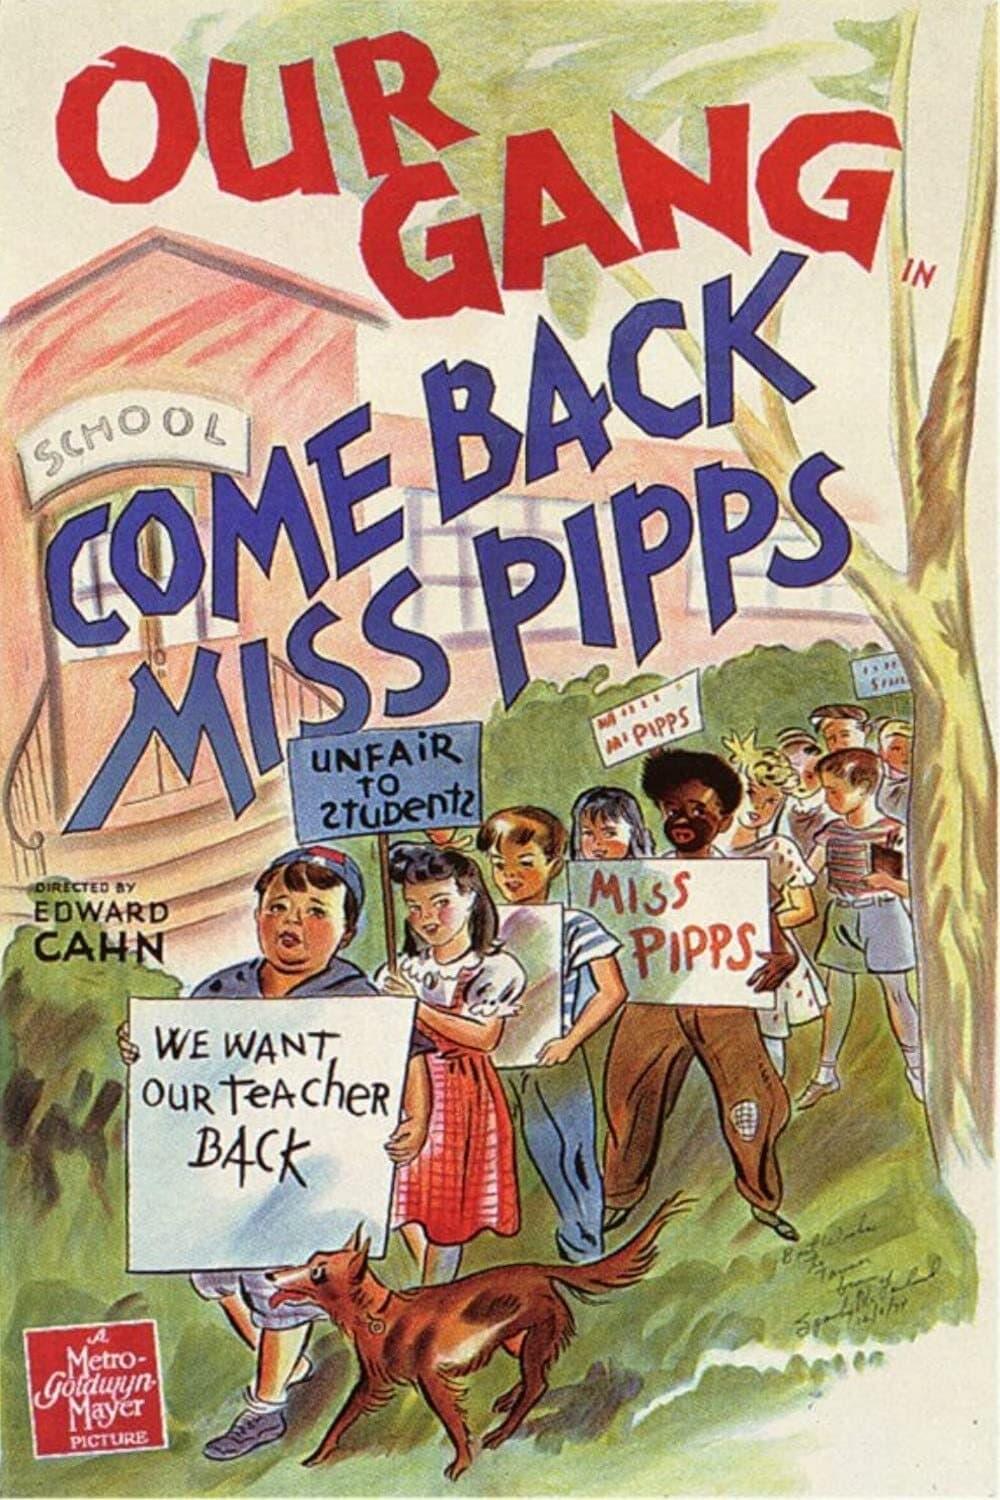 Come Back, Miss Pipps poster